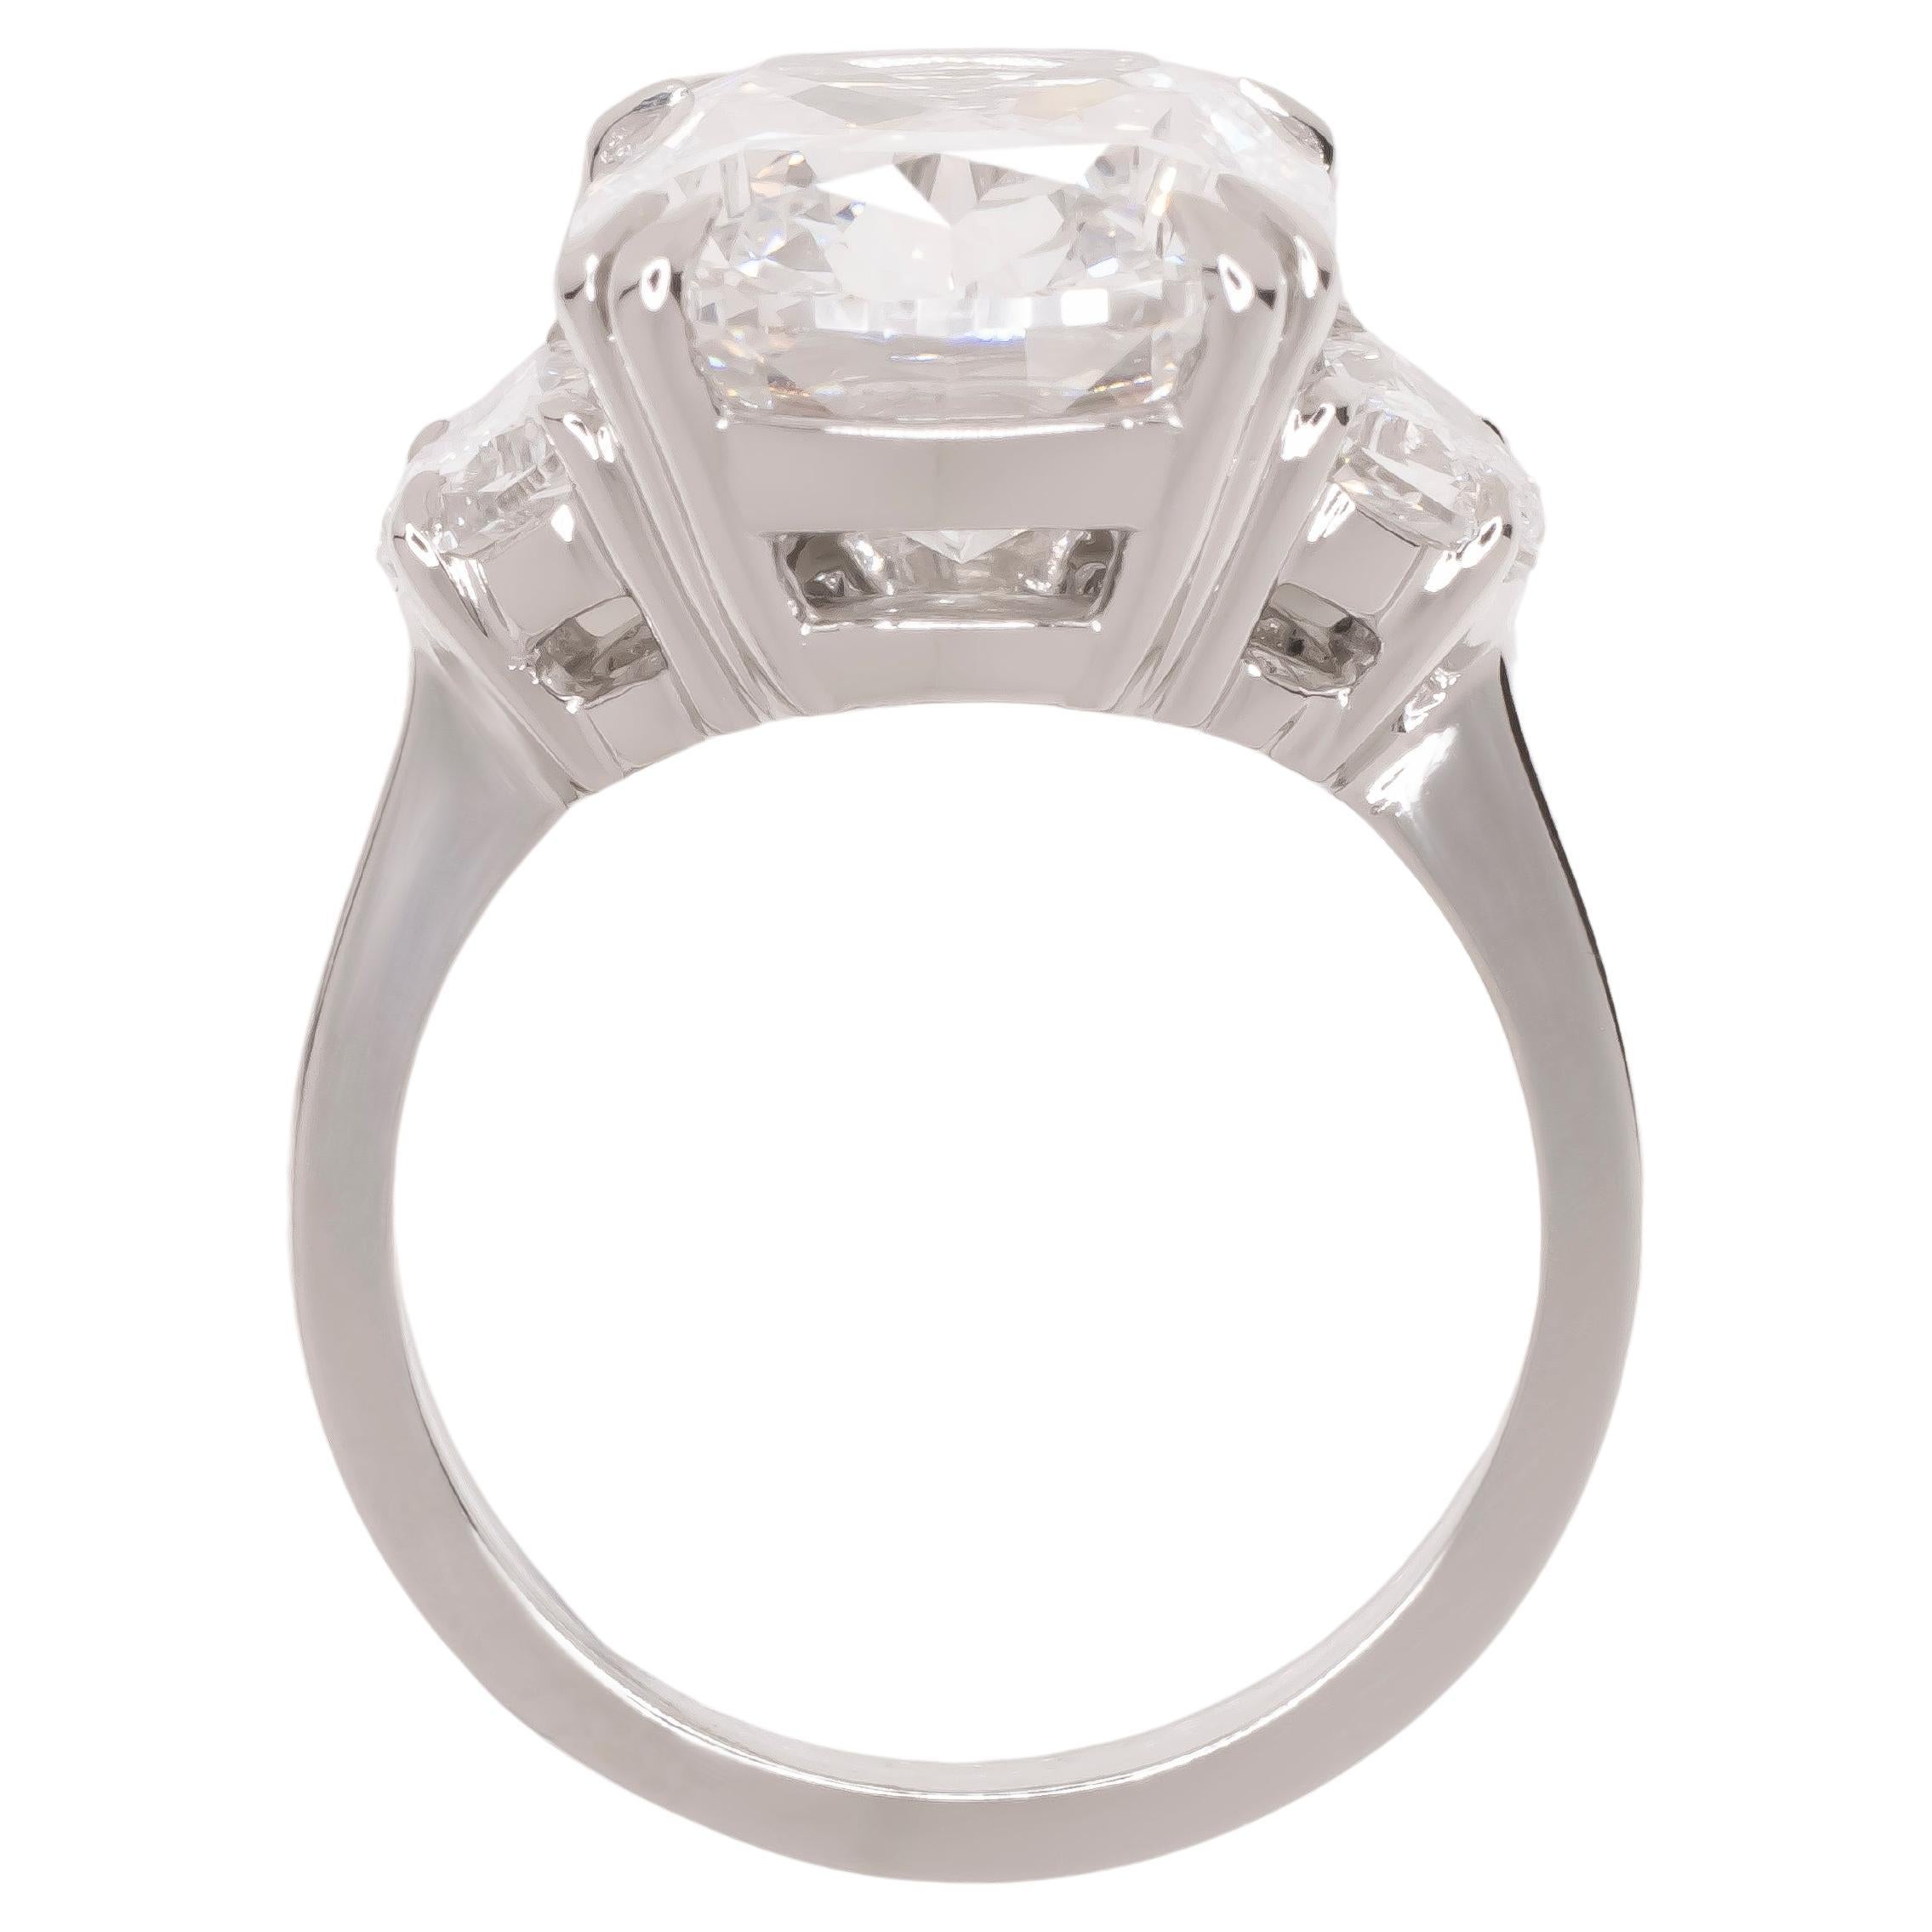 Exquisite Engagement Ring adorned with a stunning Elongated Cushion Brilliant Cut Halo Diamond. Crafted to perfection by our skilled in-house jeweler, this masterpiece boasts elegance and sophistication.

This size 6.5 ring, weighing 5.8 grams,